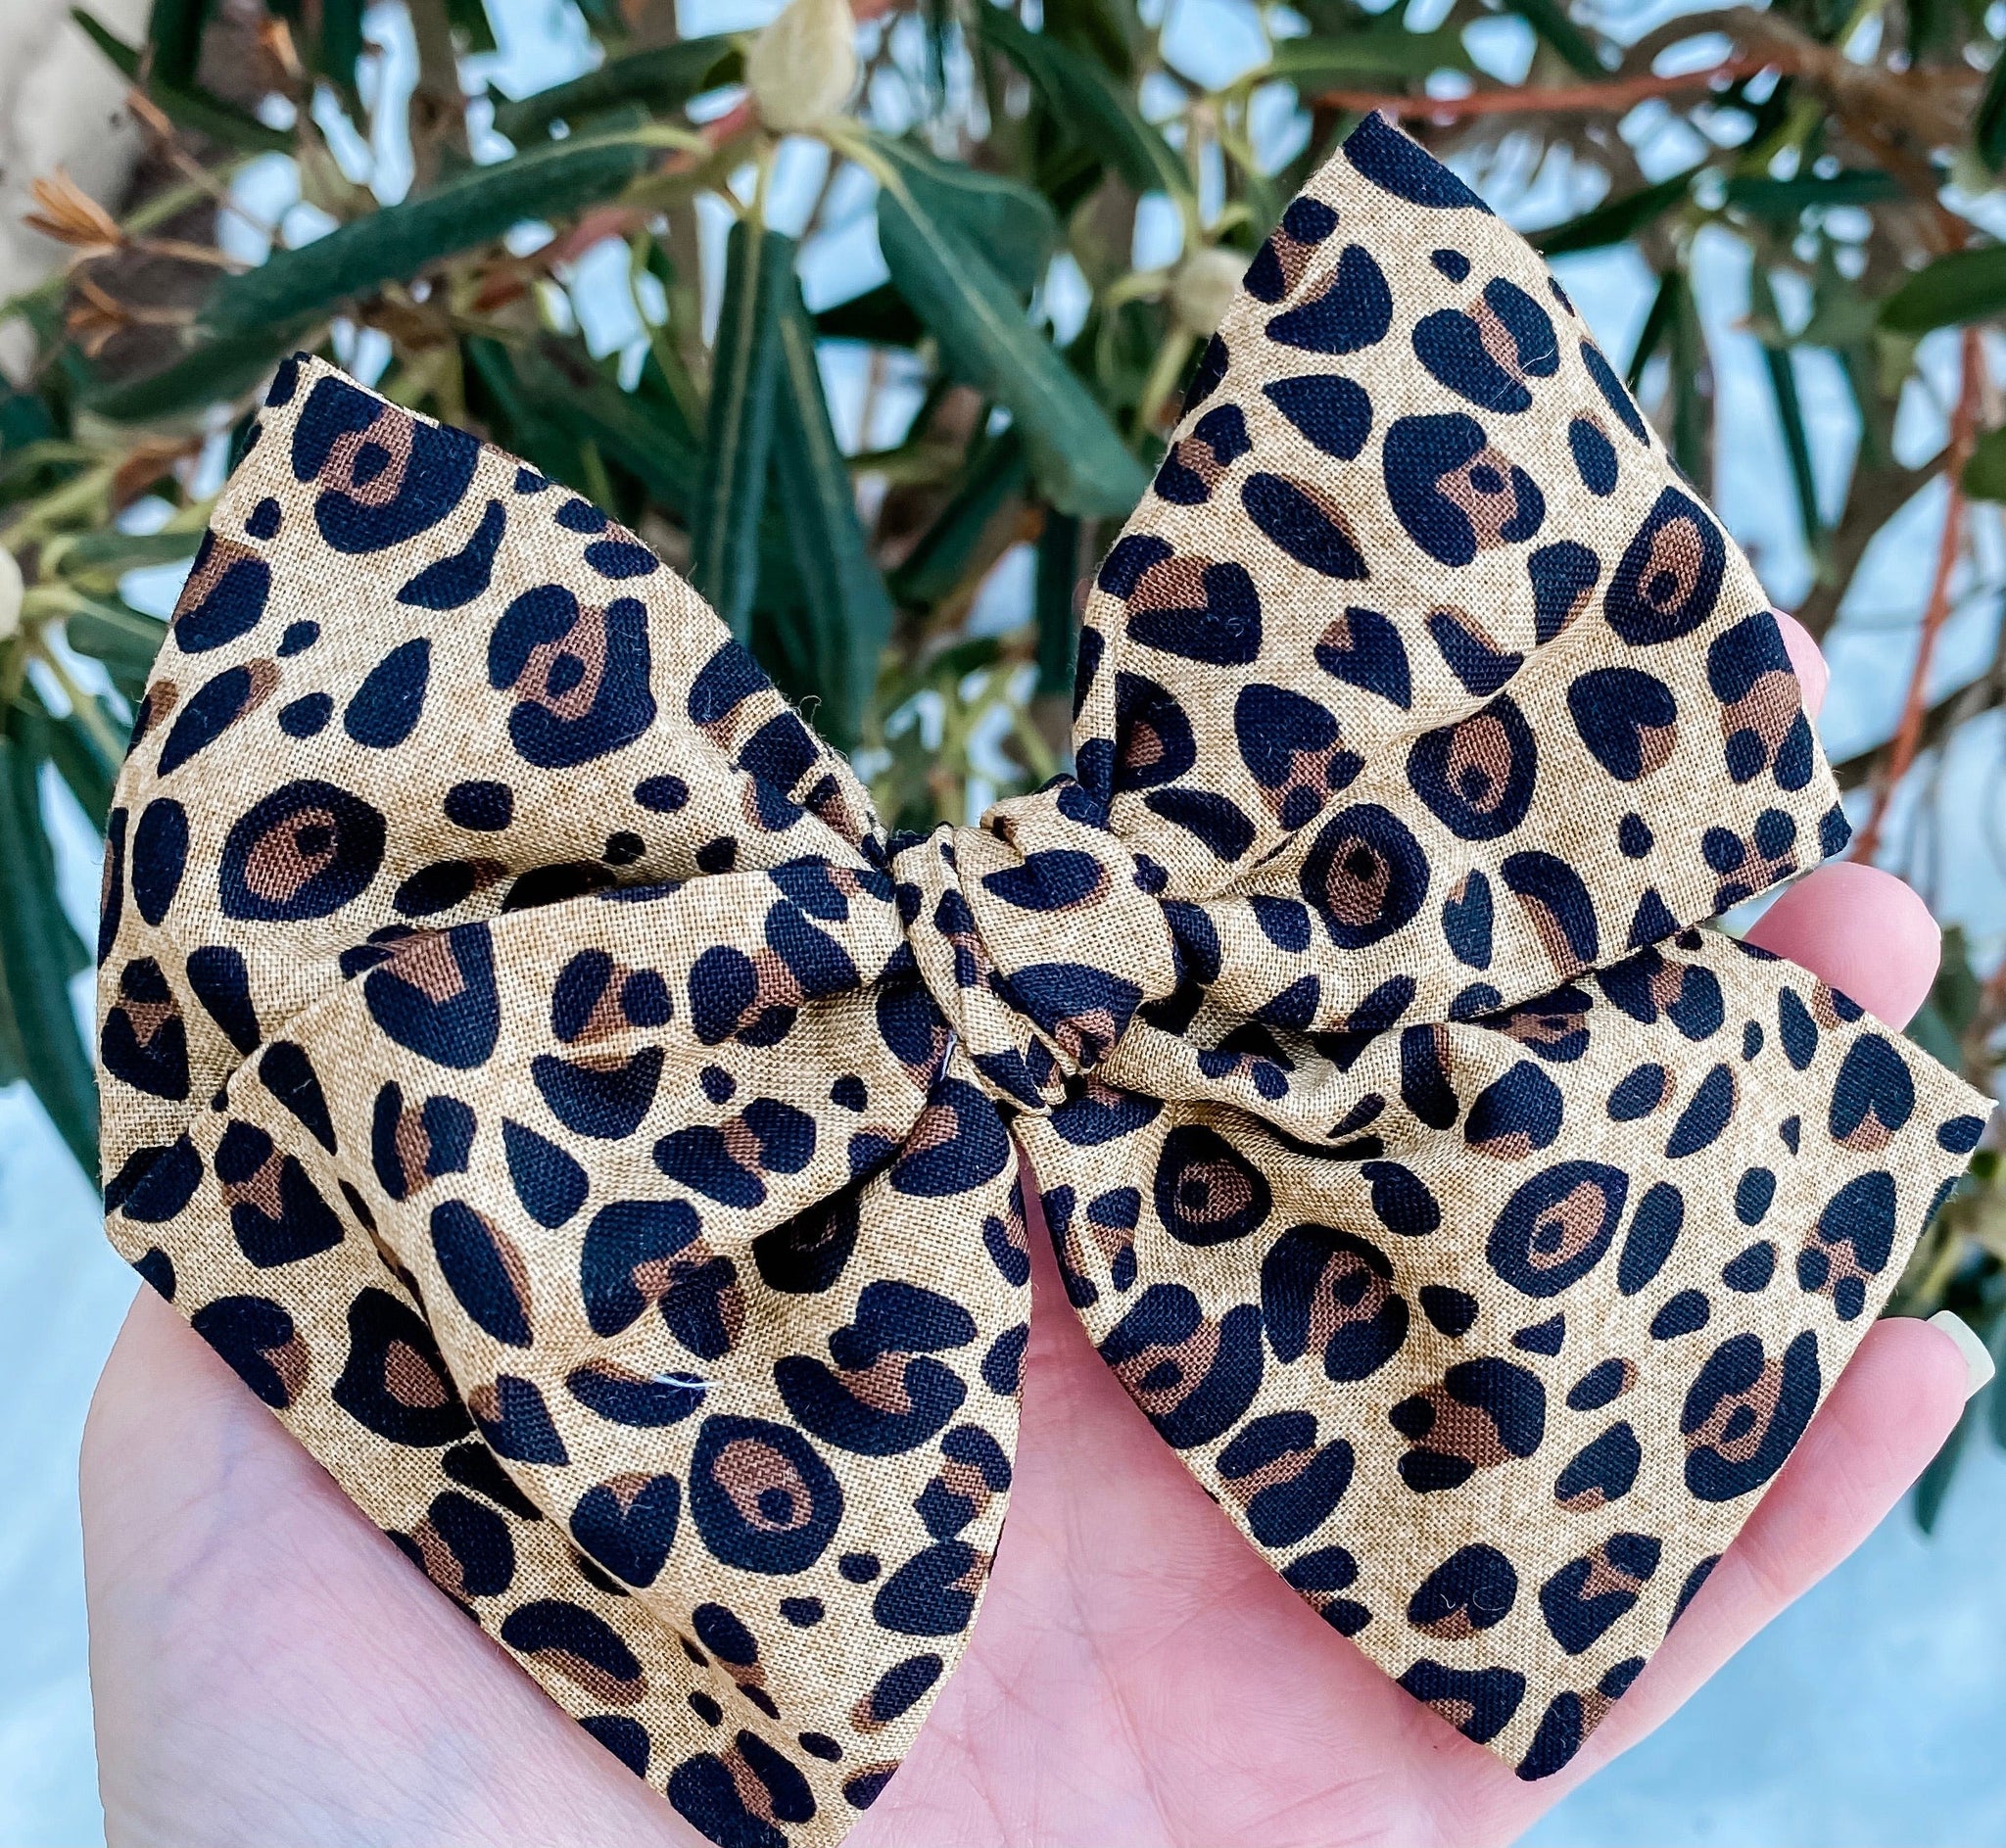 Leopard Sewing Buttons, Centers Heart Bows, Cabochon Fabric